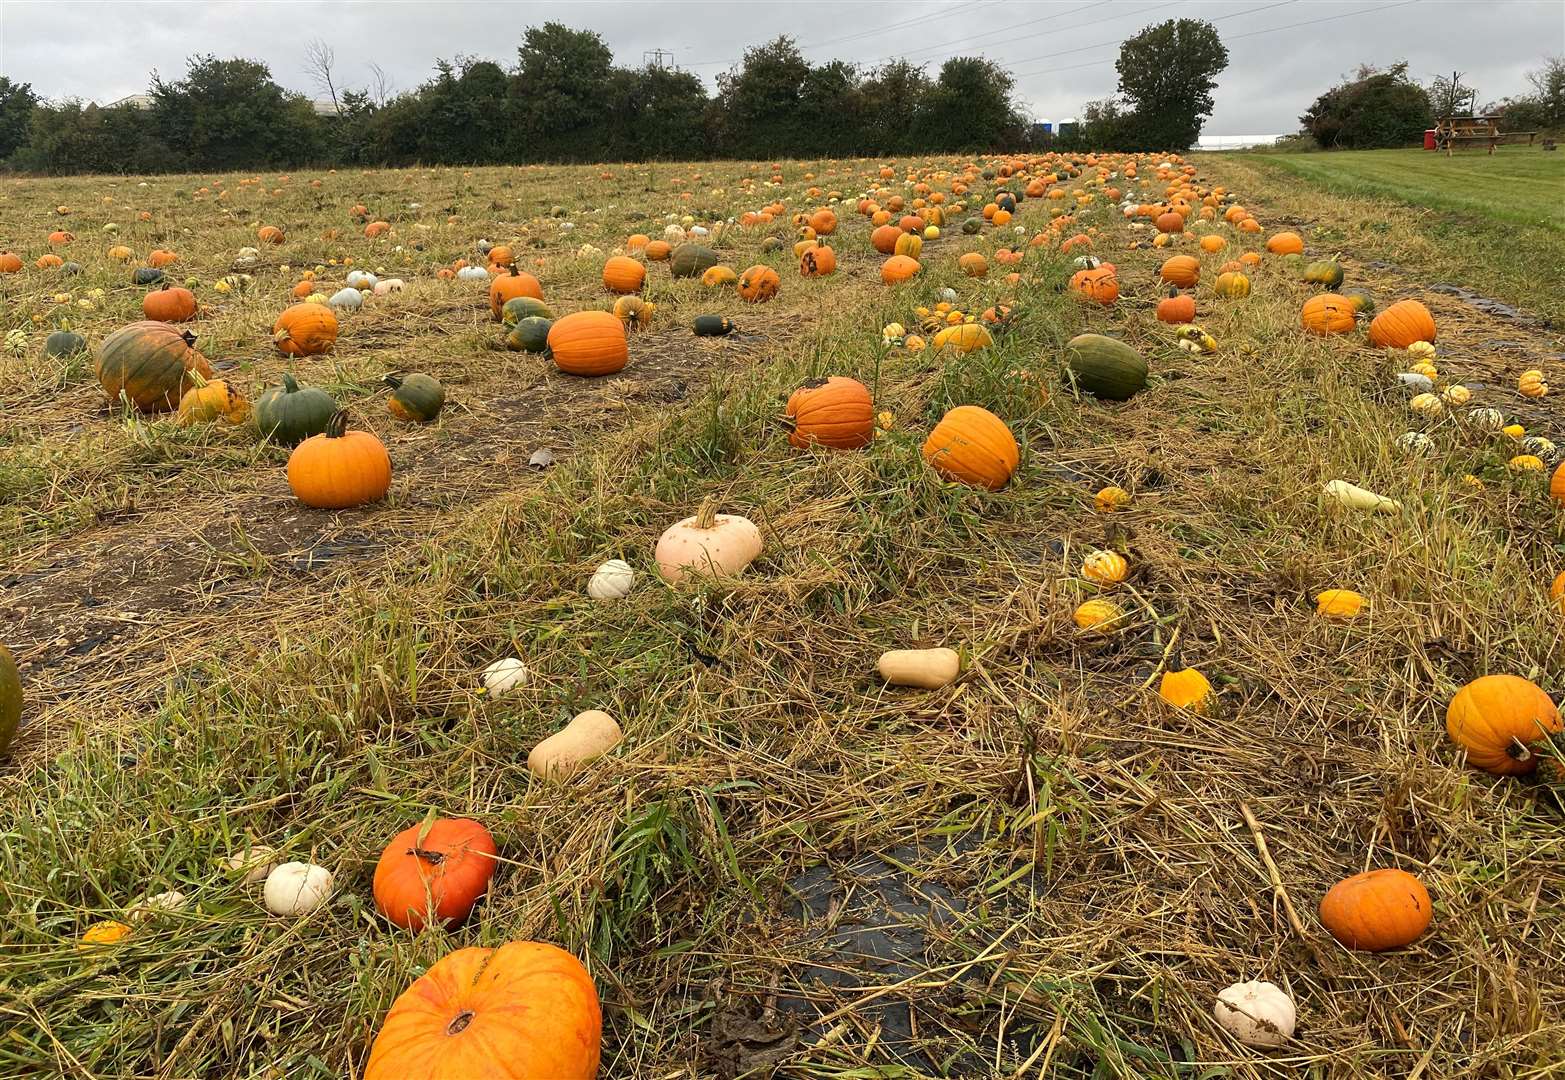 Picking your own pumpkin has become a very popular activity to do at Halloween